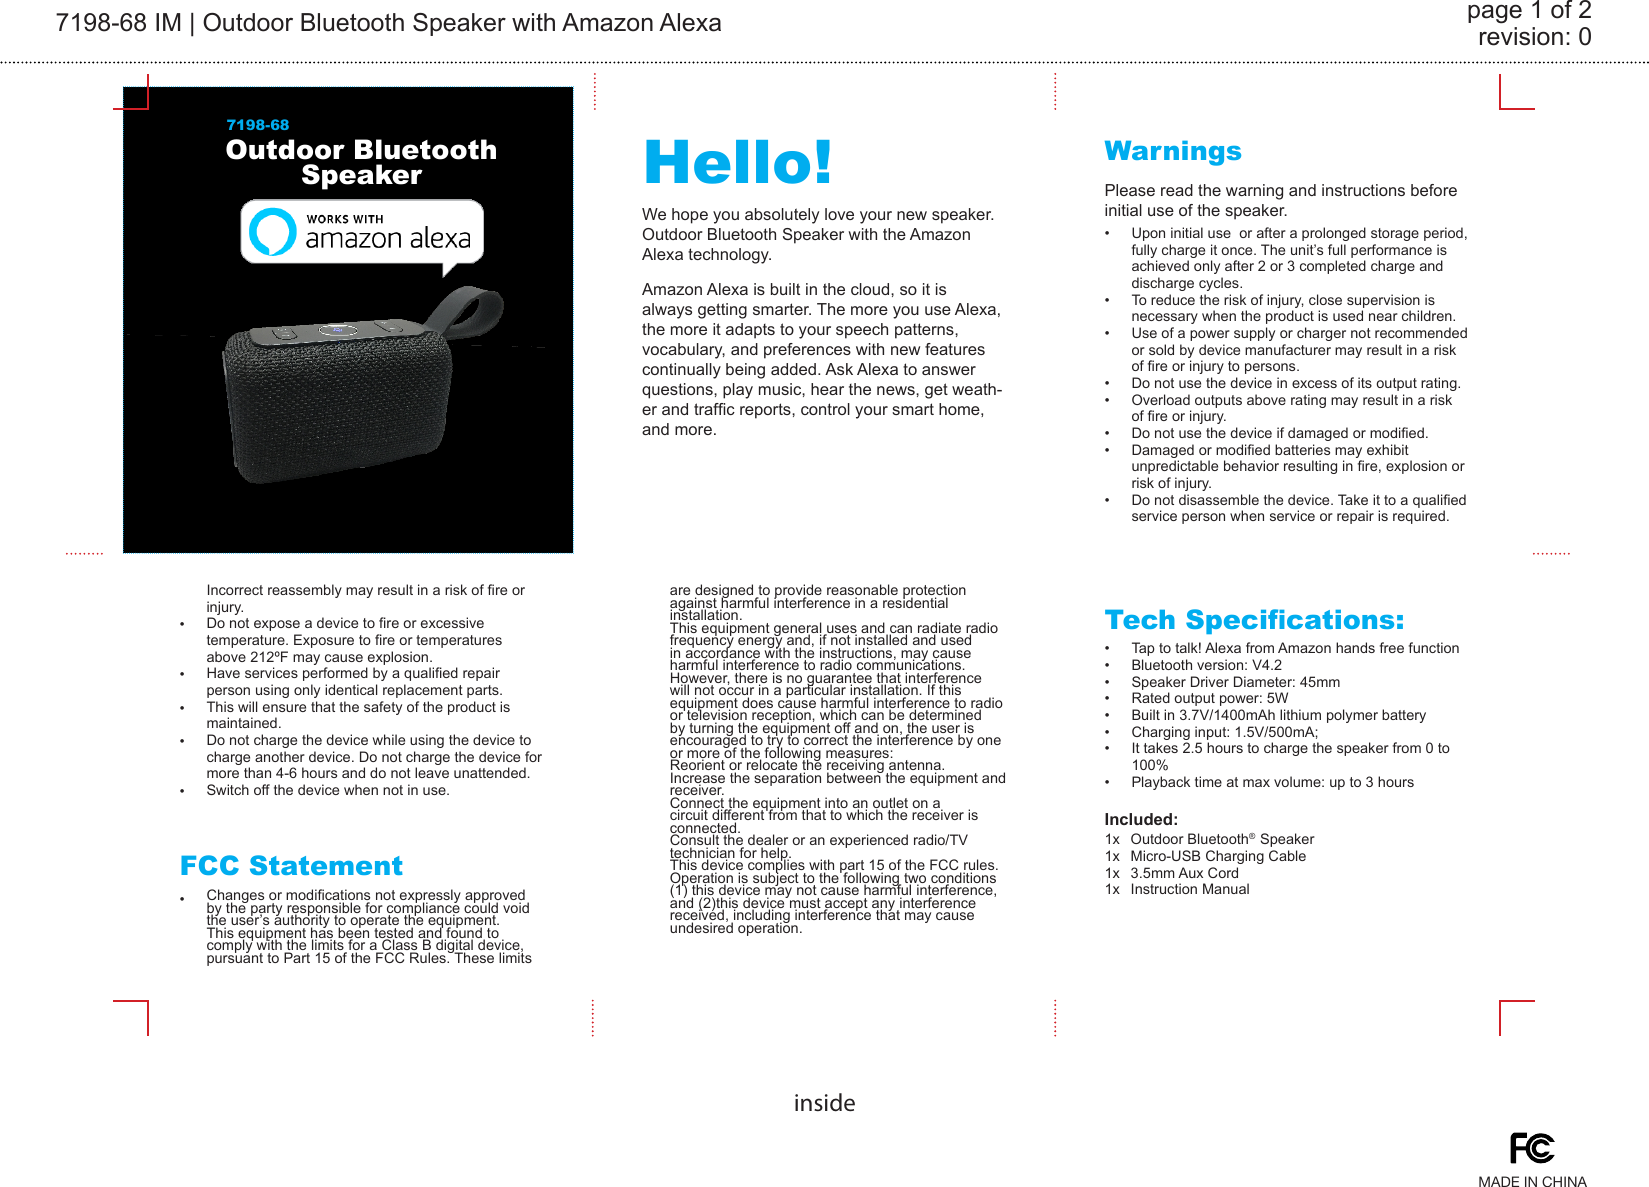 7198-68 IM | Outdoor Bluetooth Speaker with Amazon Alexa revision: 0page 1 of 2insideOutdoor Bluetooth Speaker Hello! WarningsTech Specications:FCC Statement7198-68We hope you absolutely love your new speaker. Outdoor Bluetooth Speaker with the Amazon Alexa technology.Please read the warning and instructions before initial use of the speaker.Upon initial use  or after a prolonged storage period, fully charge it once. The unit’s full performance is achieved only after 2 or 3 completed charge and discharge cycles.To reduce the risk of injury, close supervision is necessary when the product is used near children.Use of a power supply or charger not recommended or sold by device manufacturer may result in a risk of re or injury to persons.Do not use the device in excess of its output rating. Overload outputs above rating may result in a risk of re or injury.Do not use the device if damaged or modied. Damaged or modied batteries may exhibit unpredictable behavior resulting in re, explosion or risk of injury.Do not disassemble the device. Take it to a qualied service person when service or repair is required. Tap to talk! Alexa from Amazon hands free functionBluetooth version: V4.2Speaker Driver Diameter: 45mmRated output power: 5WBuilt in 3.7V/1400mAh lithium polymer battery Charging input: 1.5V/500mA; It takes 2.5 hours to charge the speaker from 0 to 100%Playback time at max volume: up to 3 hoursChanges or modications not expressly approved by the party responsible for compliance could void the user’s authority to operate the equipment. This equipment has been tested and found to comply with the limits for a Class B digital device, pursuant to Part 15 of the FCC Rules. These limits are designed to provide reasonable protection against harmful interference in a residential installation. This equipment general uses and can radiate radio frequency energy and, if not installed and used in accordance with the instructions, may cause harmful interference to radio communications. However, there is no guarantee that interference will not occur in a particular installation. If this equipment does cause harmful interference to radio or television reception, which can be determined by turning the equipment off and on, the user is encouraged to try to correct the interference by one or more of the following measures:Reorient or relocate the receiving antenna.Increase the separation between the equipment and receiver. Connect the equipment into an outlet on a circuit different from that to which the receiver is connected. Consult the dealer or an experienced radio/TV technician for help.This device complies with part 15 of the FCC rules. Operation is subject to the following two conditions (1) this device may not cause harmful interference, and (2)this device must accept any interference received, including interference that may cause undesired operation.MADE IN CHINAIncorrect reassembly may result in a risk of re or injury.Do not expose a device to re or excessive temperature. Exposure to re or temperatures above 212ºF may cause explosion. Have services performed by a qualied repair person using only identical replacement parts. This will ensure that the safety of the product is maintained.Do not charge the device while using the device to charge another device. Do not charge the device for more than 4-6 hours and do not leave unattended.Switch off the device when not in use.••••••••••••••••••••••Amazon Alexa is built in the cloud, so it is always getting smarter. The more you use Alexa, the more it adapts to your speech patterns, vocabulary, and preferences with new features continually being added. Ask Alexa to answer questions, play music, hear the news, get weath-er and trafc reports, control your smart home, and more.Included:Outdoor Bluetooth®  SpeakerMicro-USB Charging Cable3.5mm Aux CordInstruction Manual1x1x1x1x